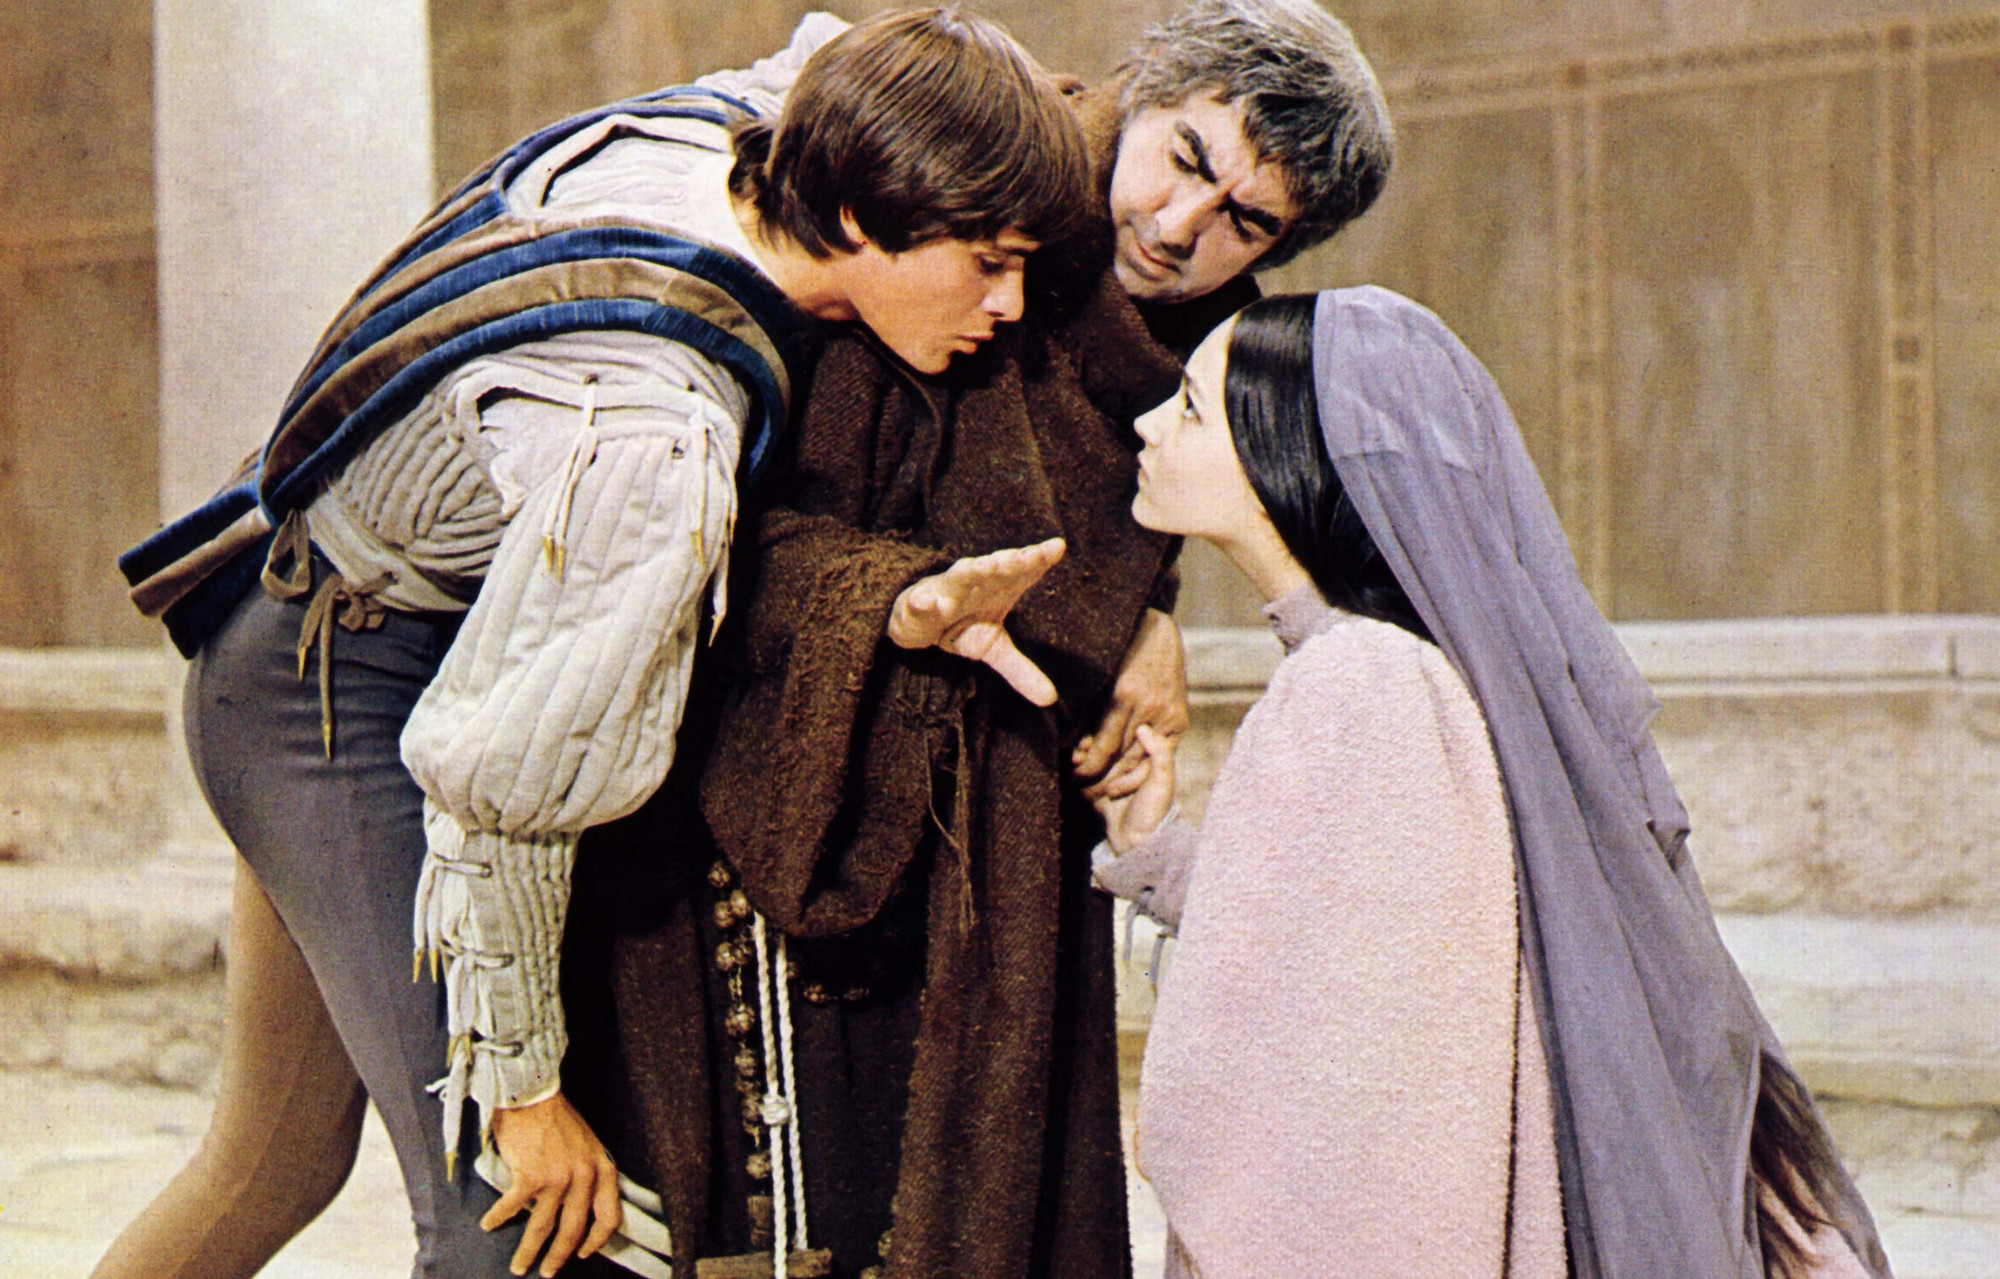 juliet from romeo and juliet 1968